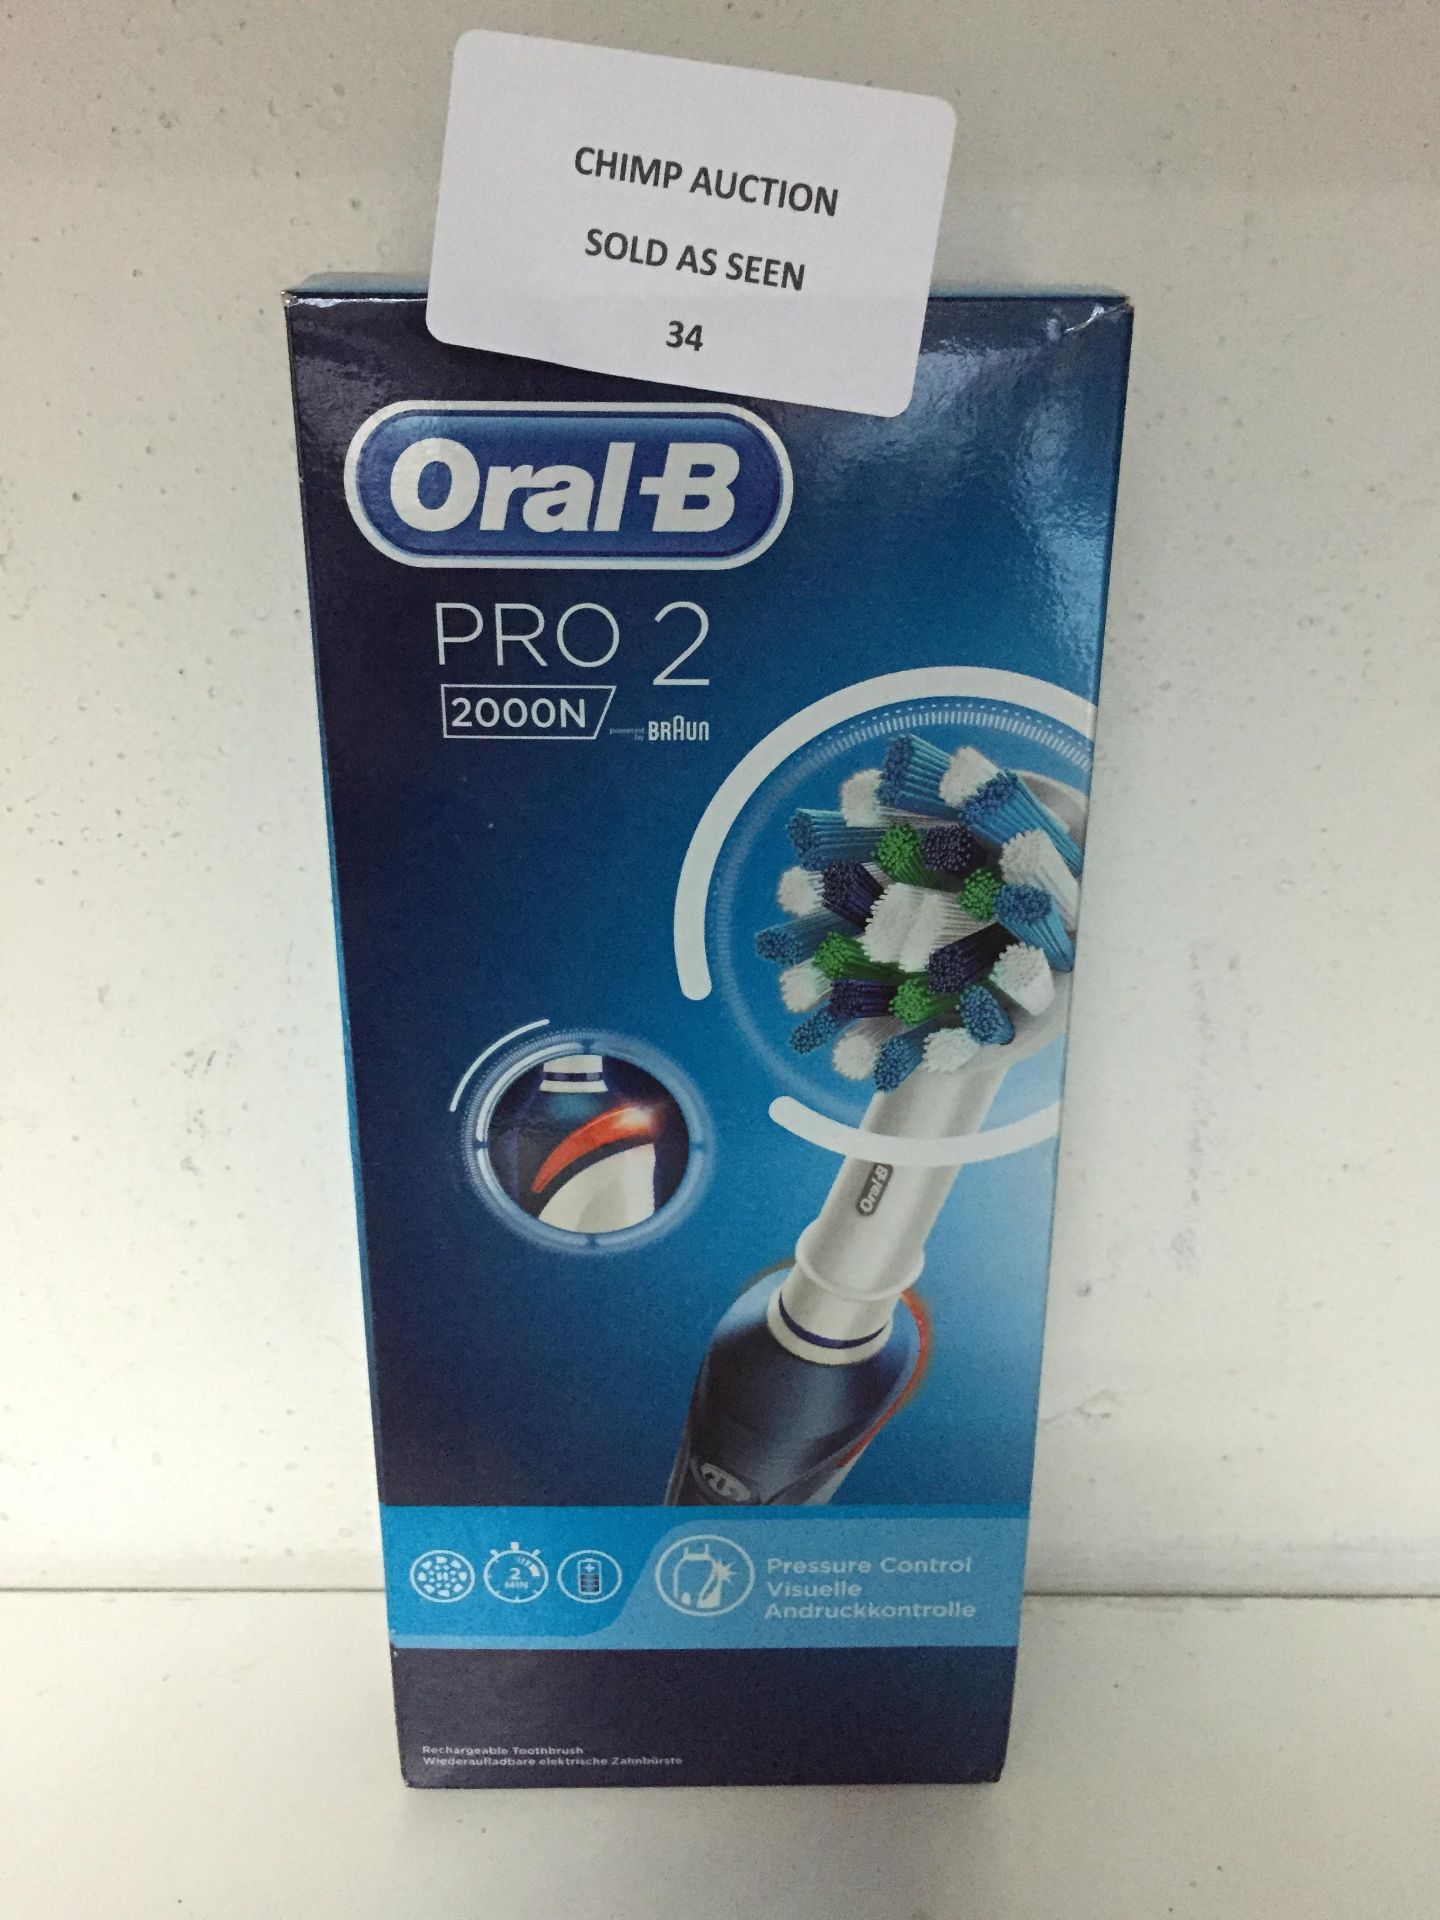 Oral-B Pro 2 2000 CrossAction Electric Toothbrush RRP £89.99.